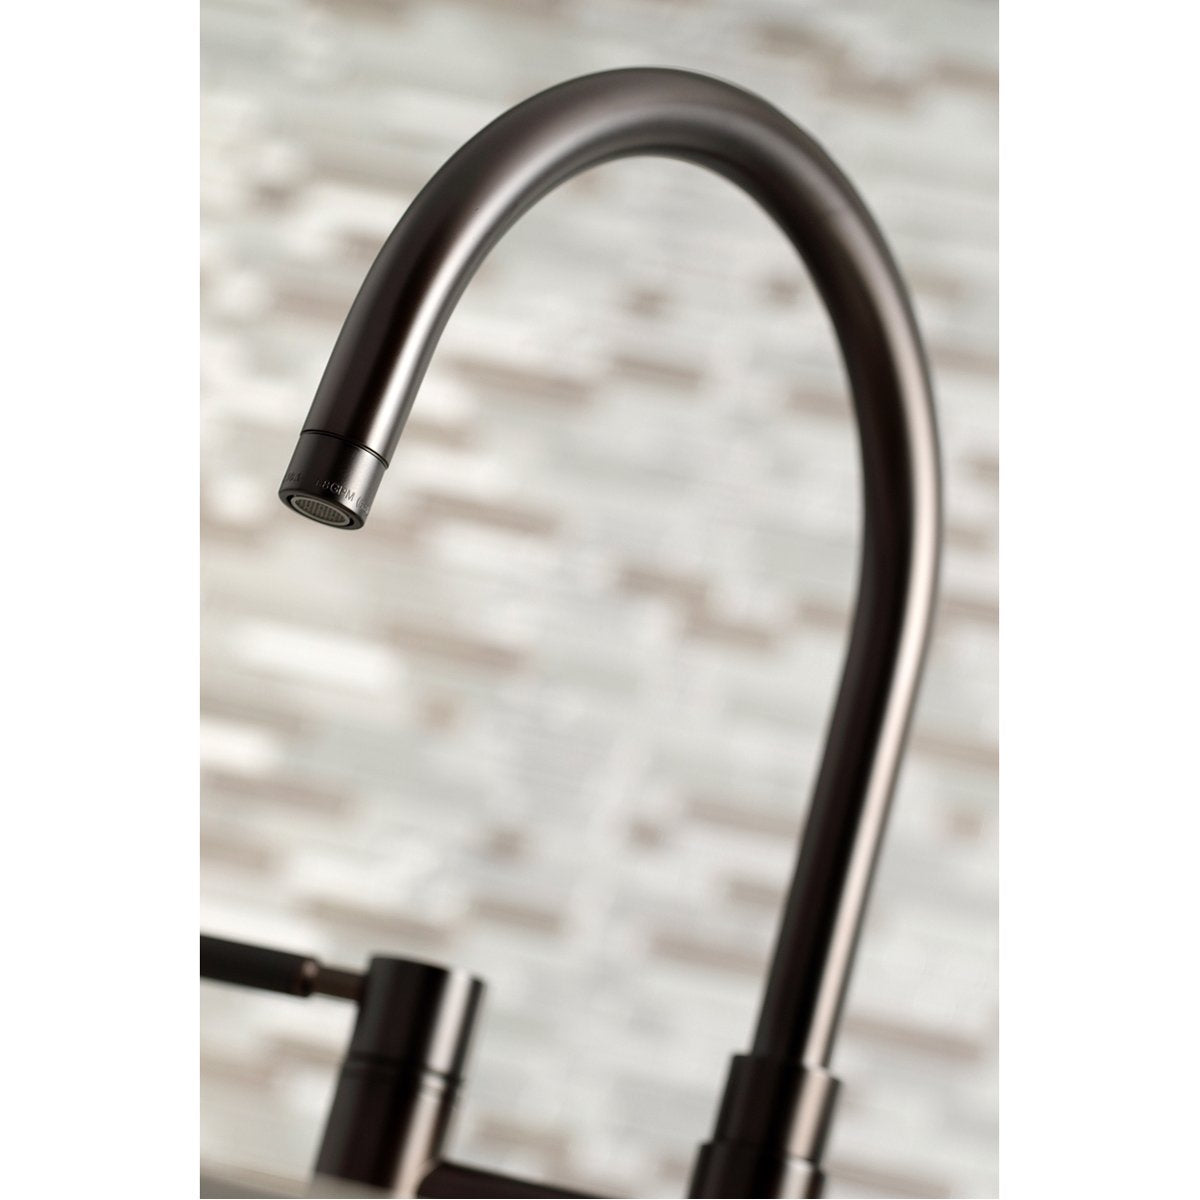 Kingston Brass Concord Two-Handle Bridge Kitchen Faucet with Brass Side Sprayer